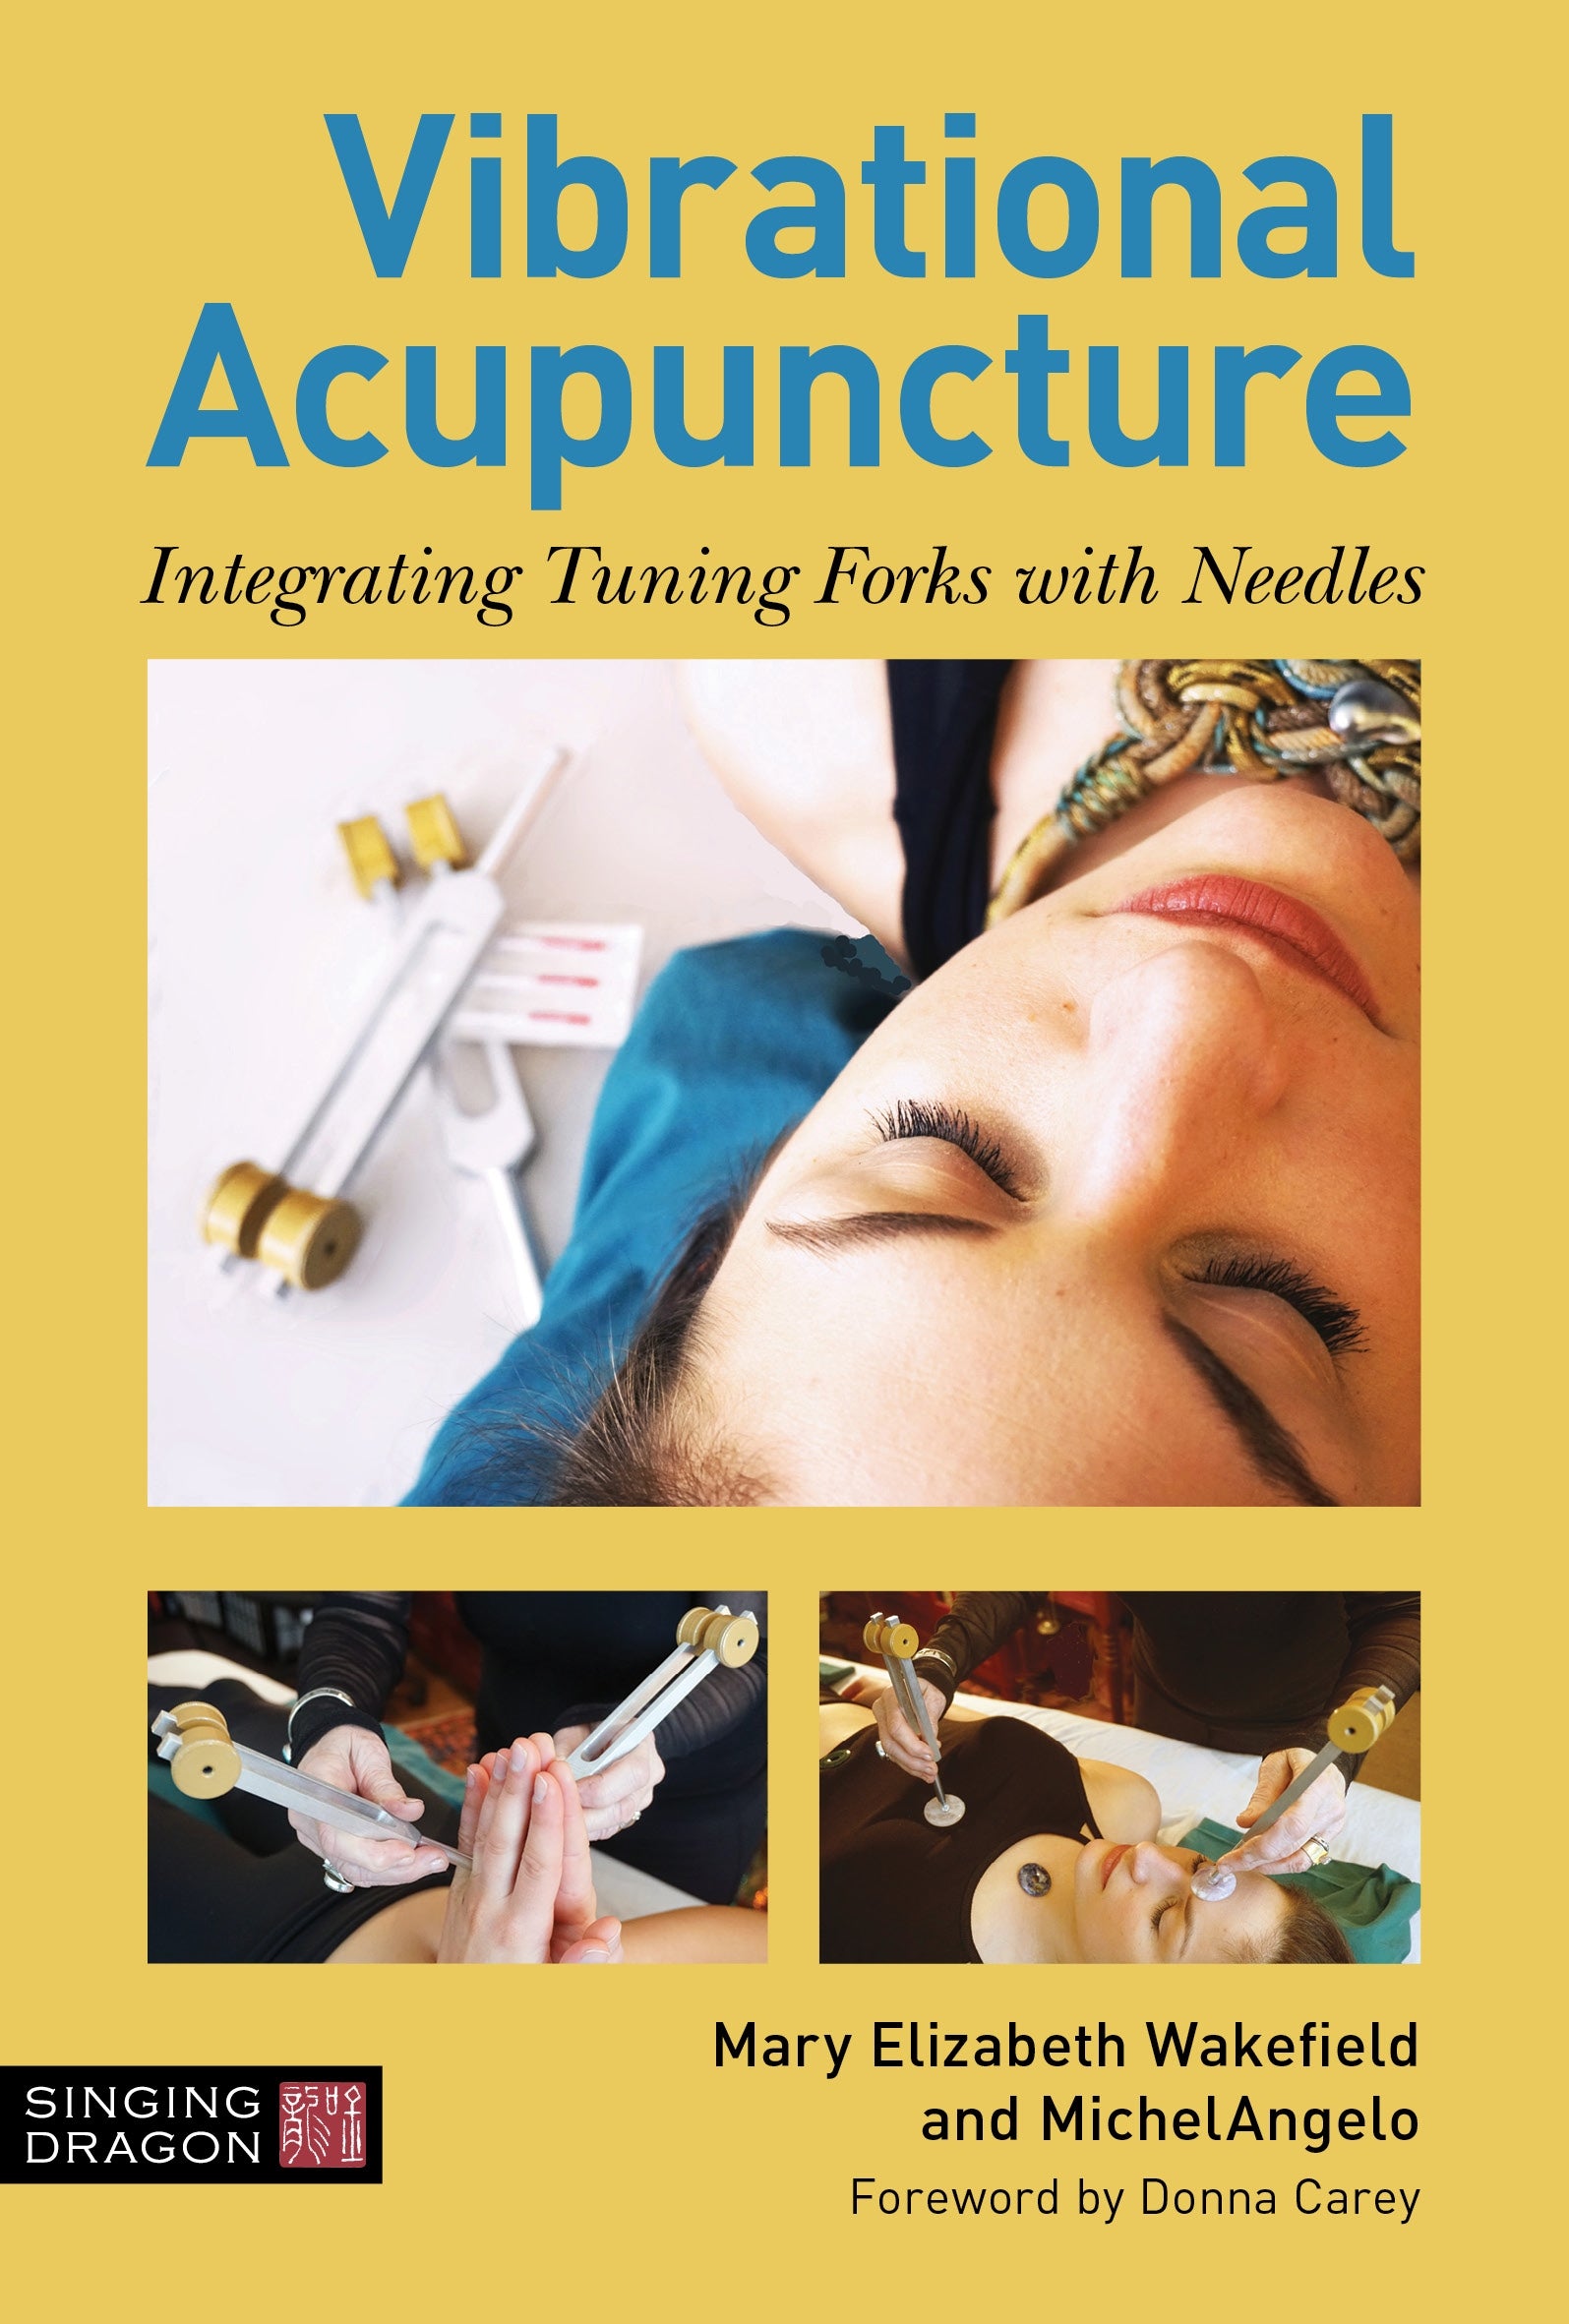 Vibrational Acupuncture by Mary Elizabeth Wakefield,  MichelAngelo, Donna Carey